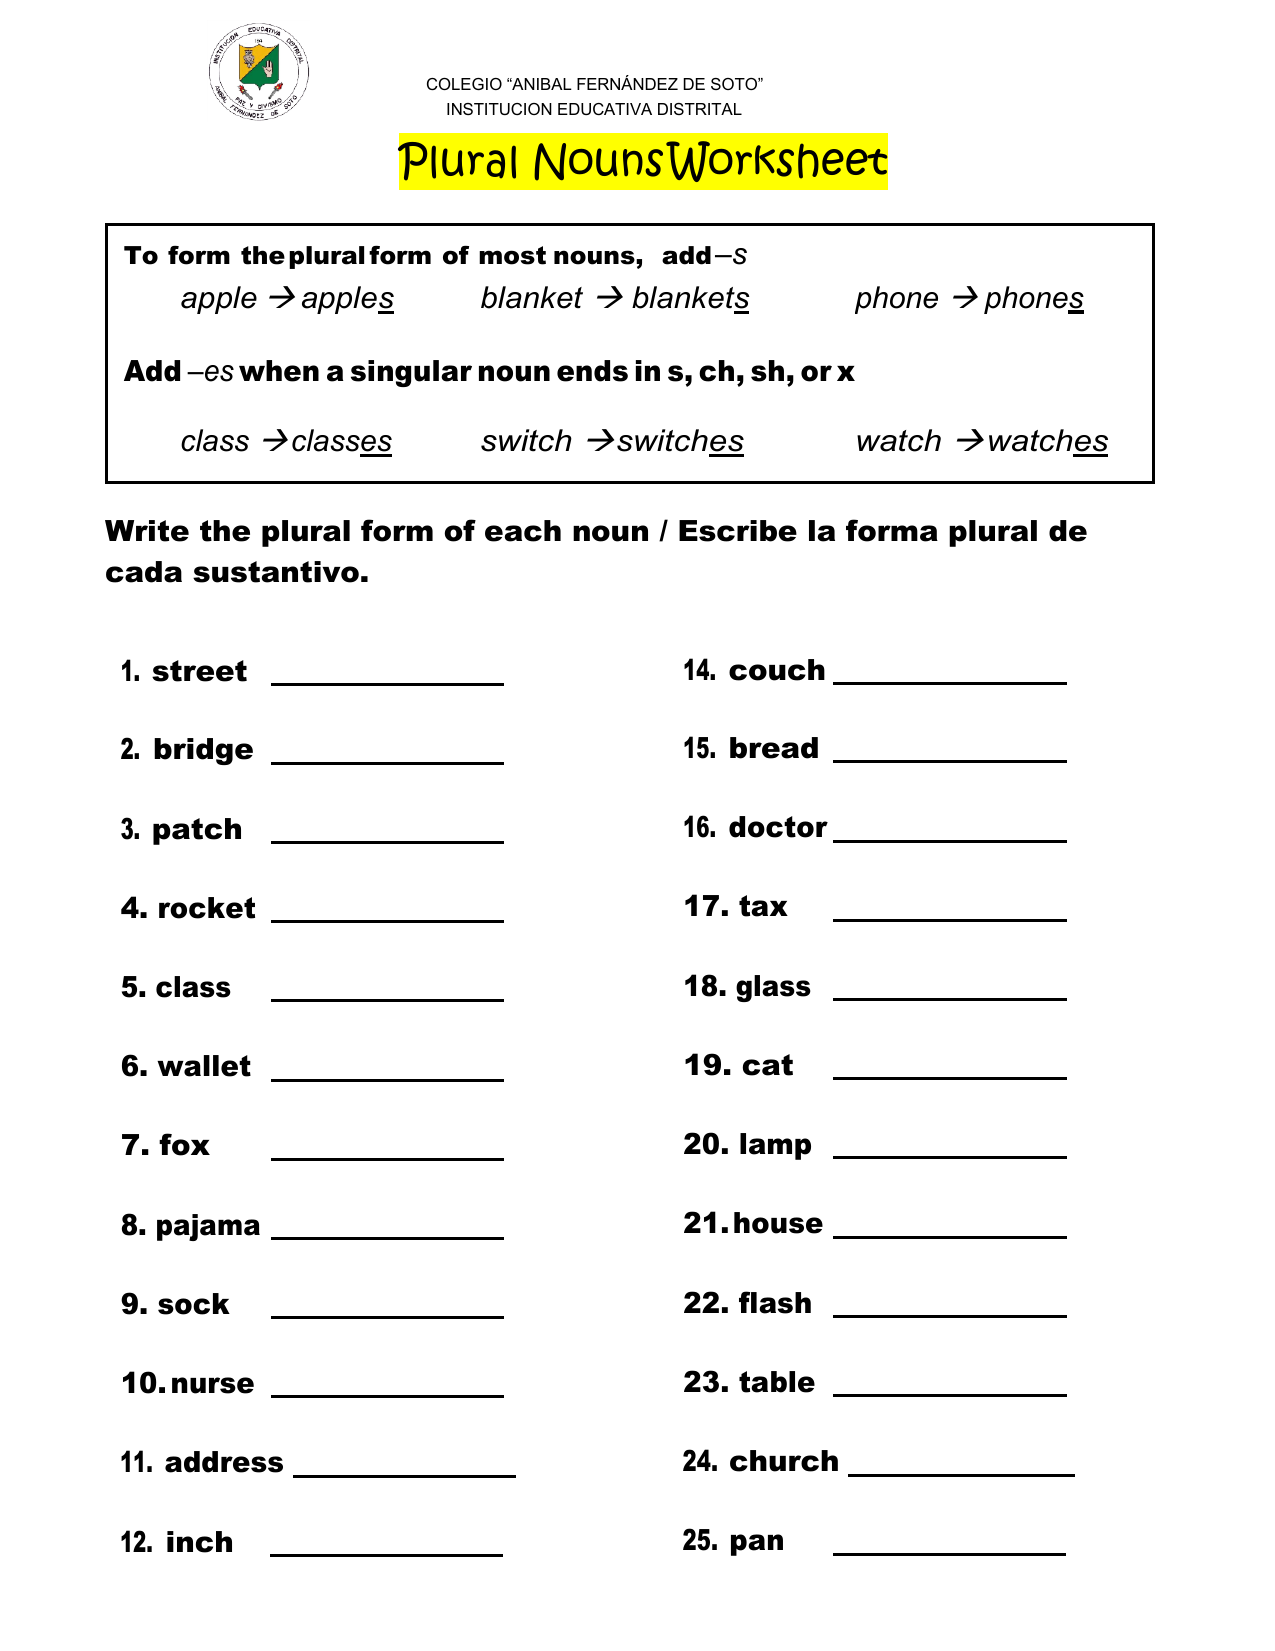 free-printable-worksheets-on-forming-plurals-of-nouns-printable-forms